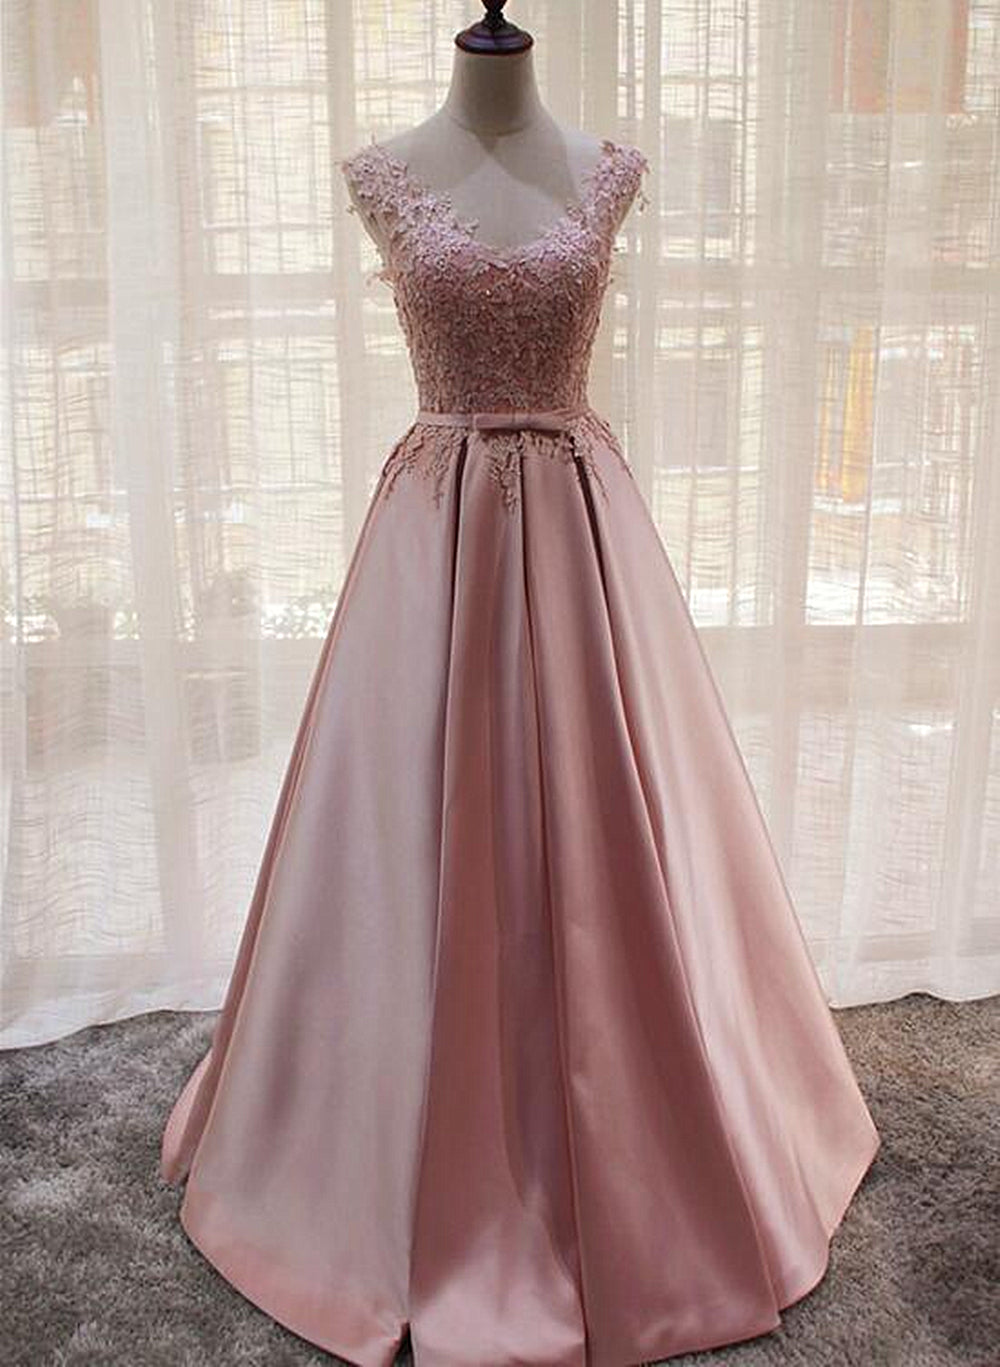 Prom Dress Pieces, Charming Pink Satin Long Formal Gown, Prom Dress , Lovely Satin Party Dress